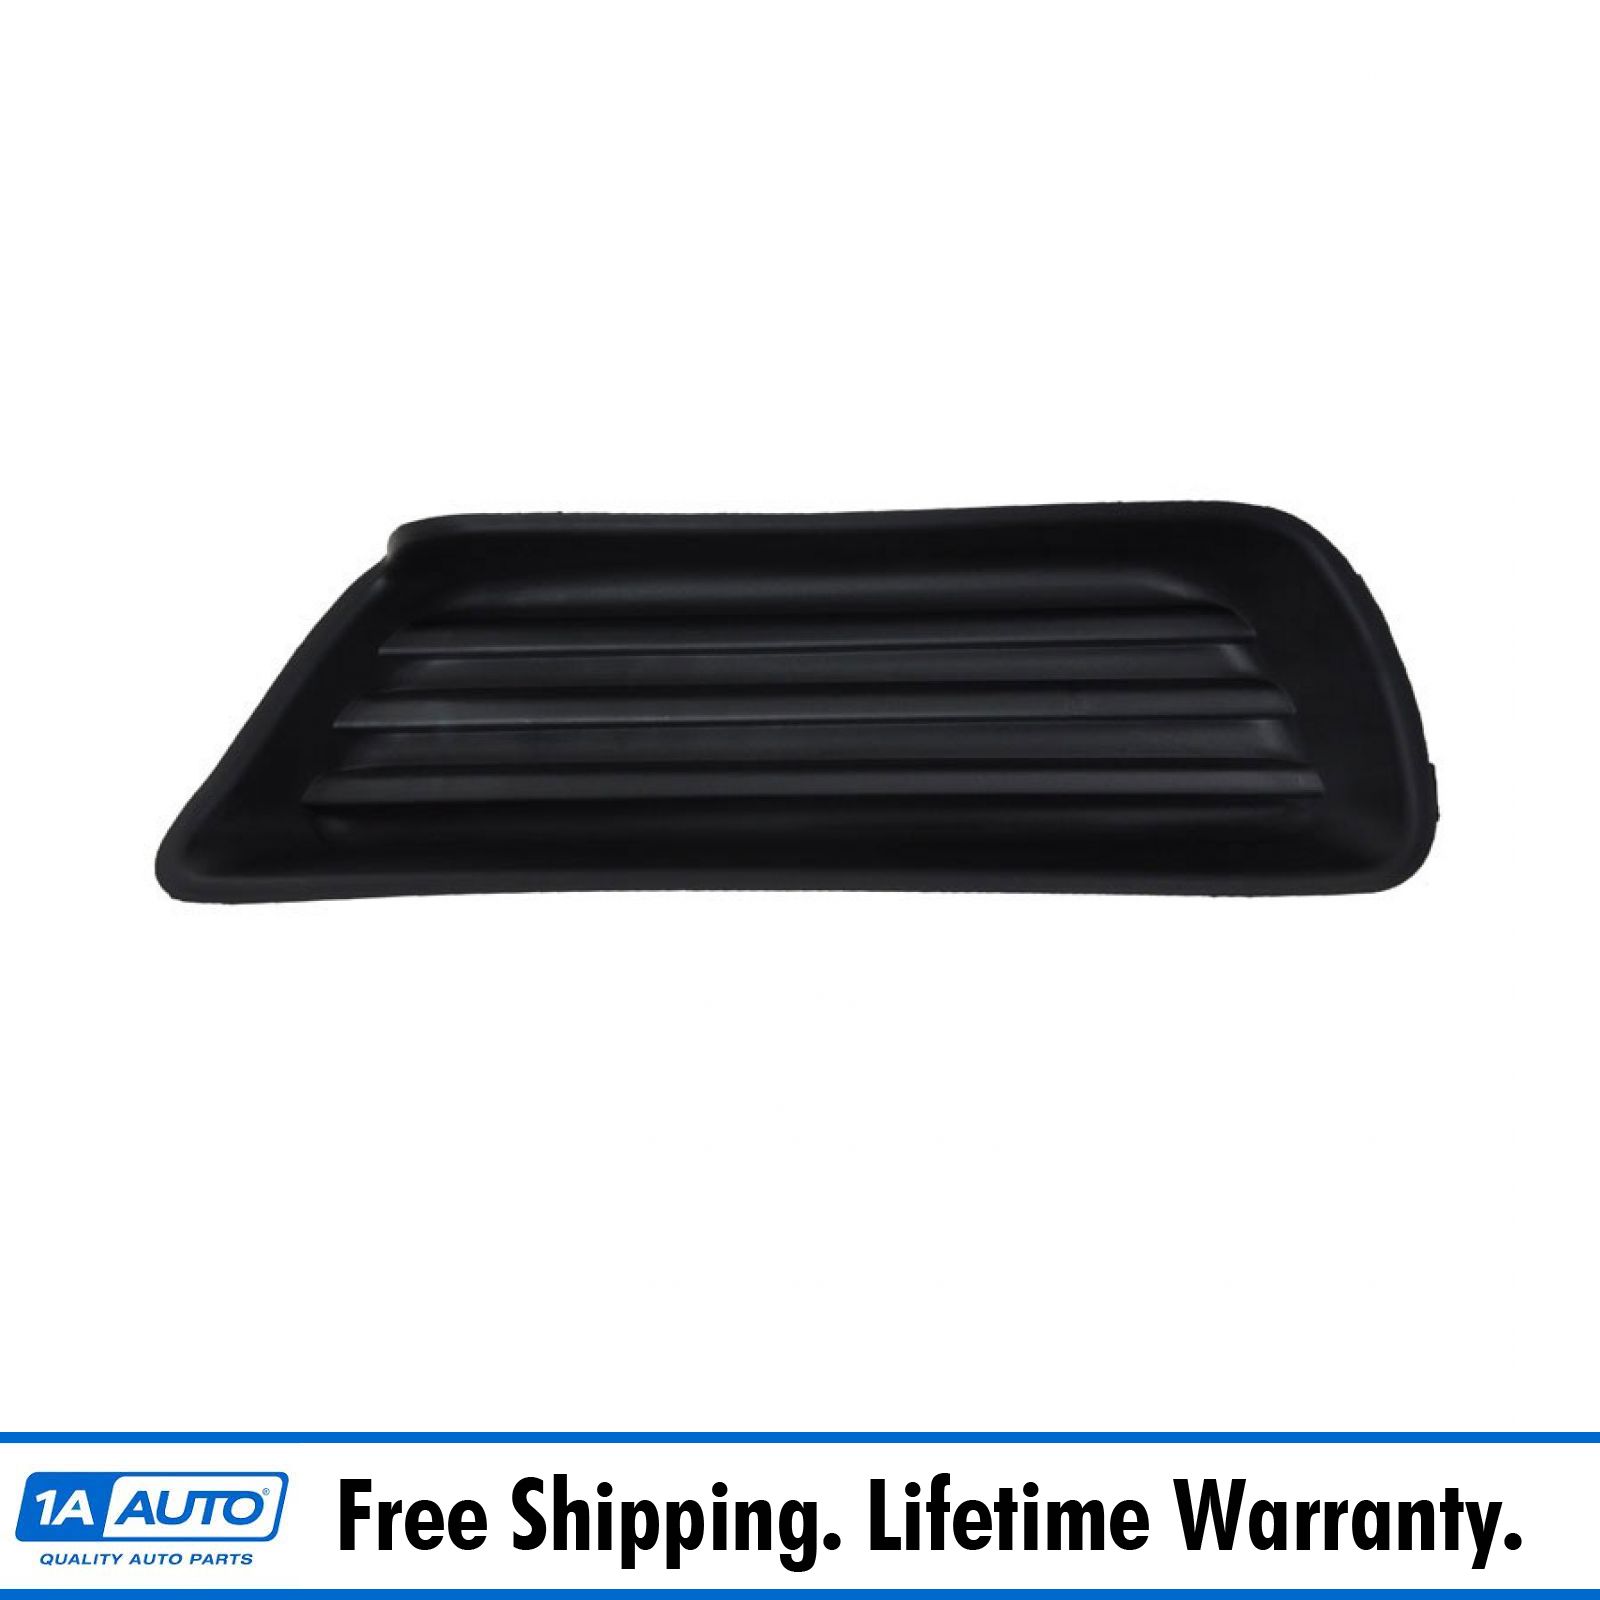 DEPO 312-2507L-UD Replacement Driver Side Fog Light Cover Black This product is an aftermarket product. It is not created or sold by the OE car company 